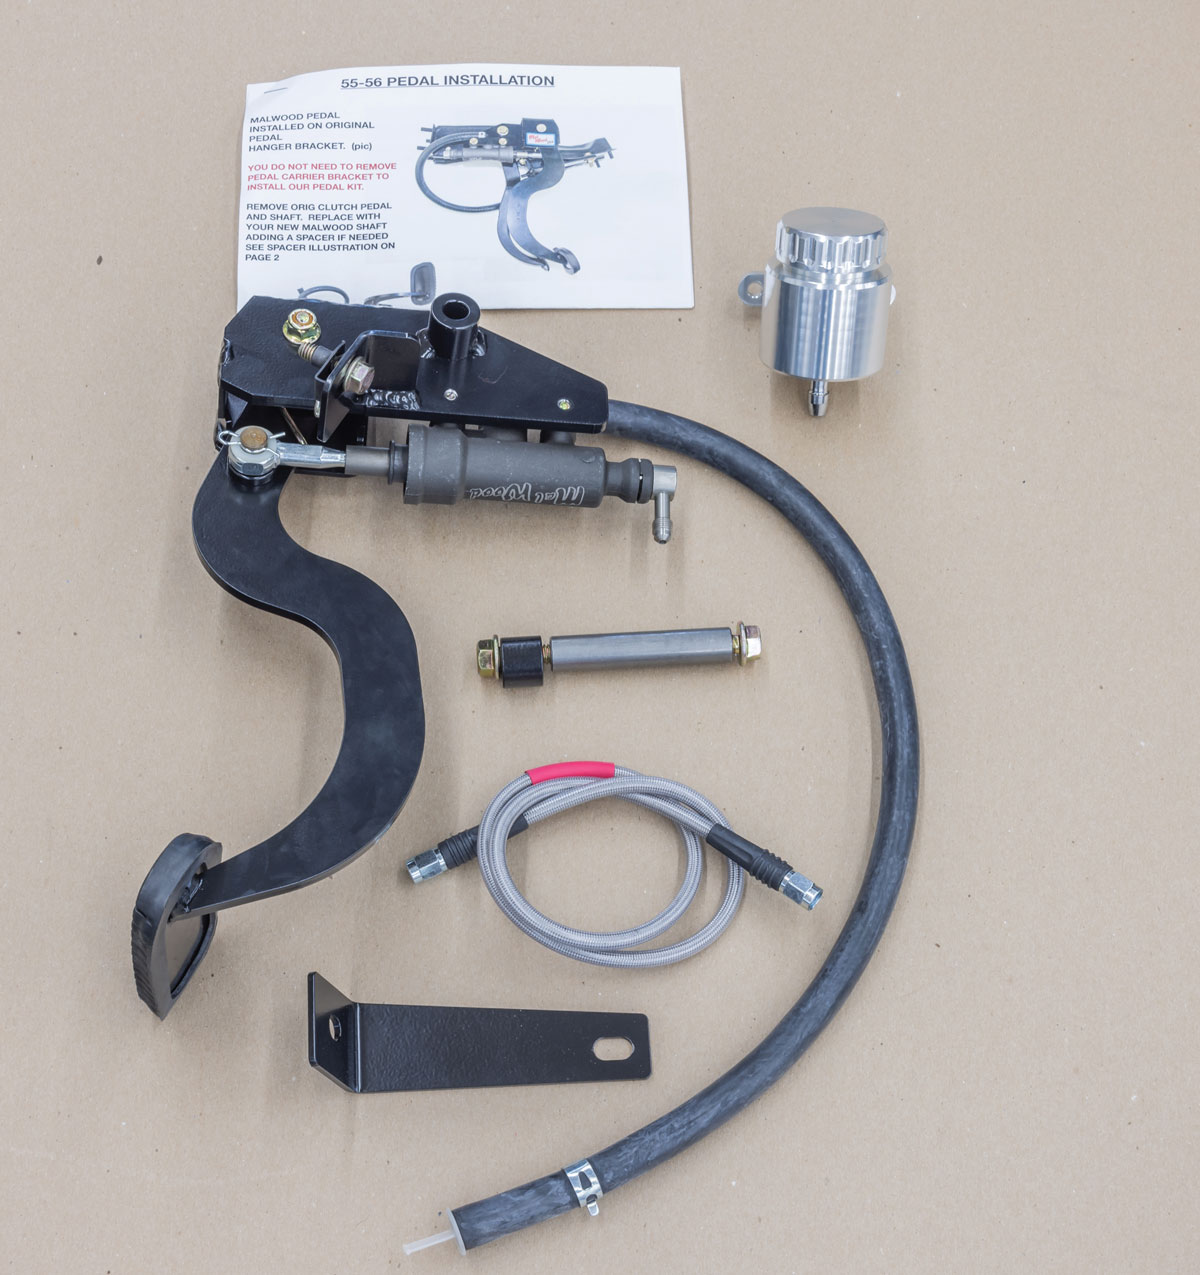 Here’s the kit as it comes out of the box from American Powertrain